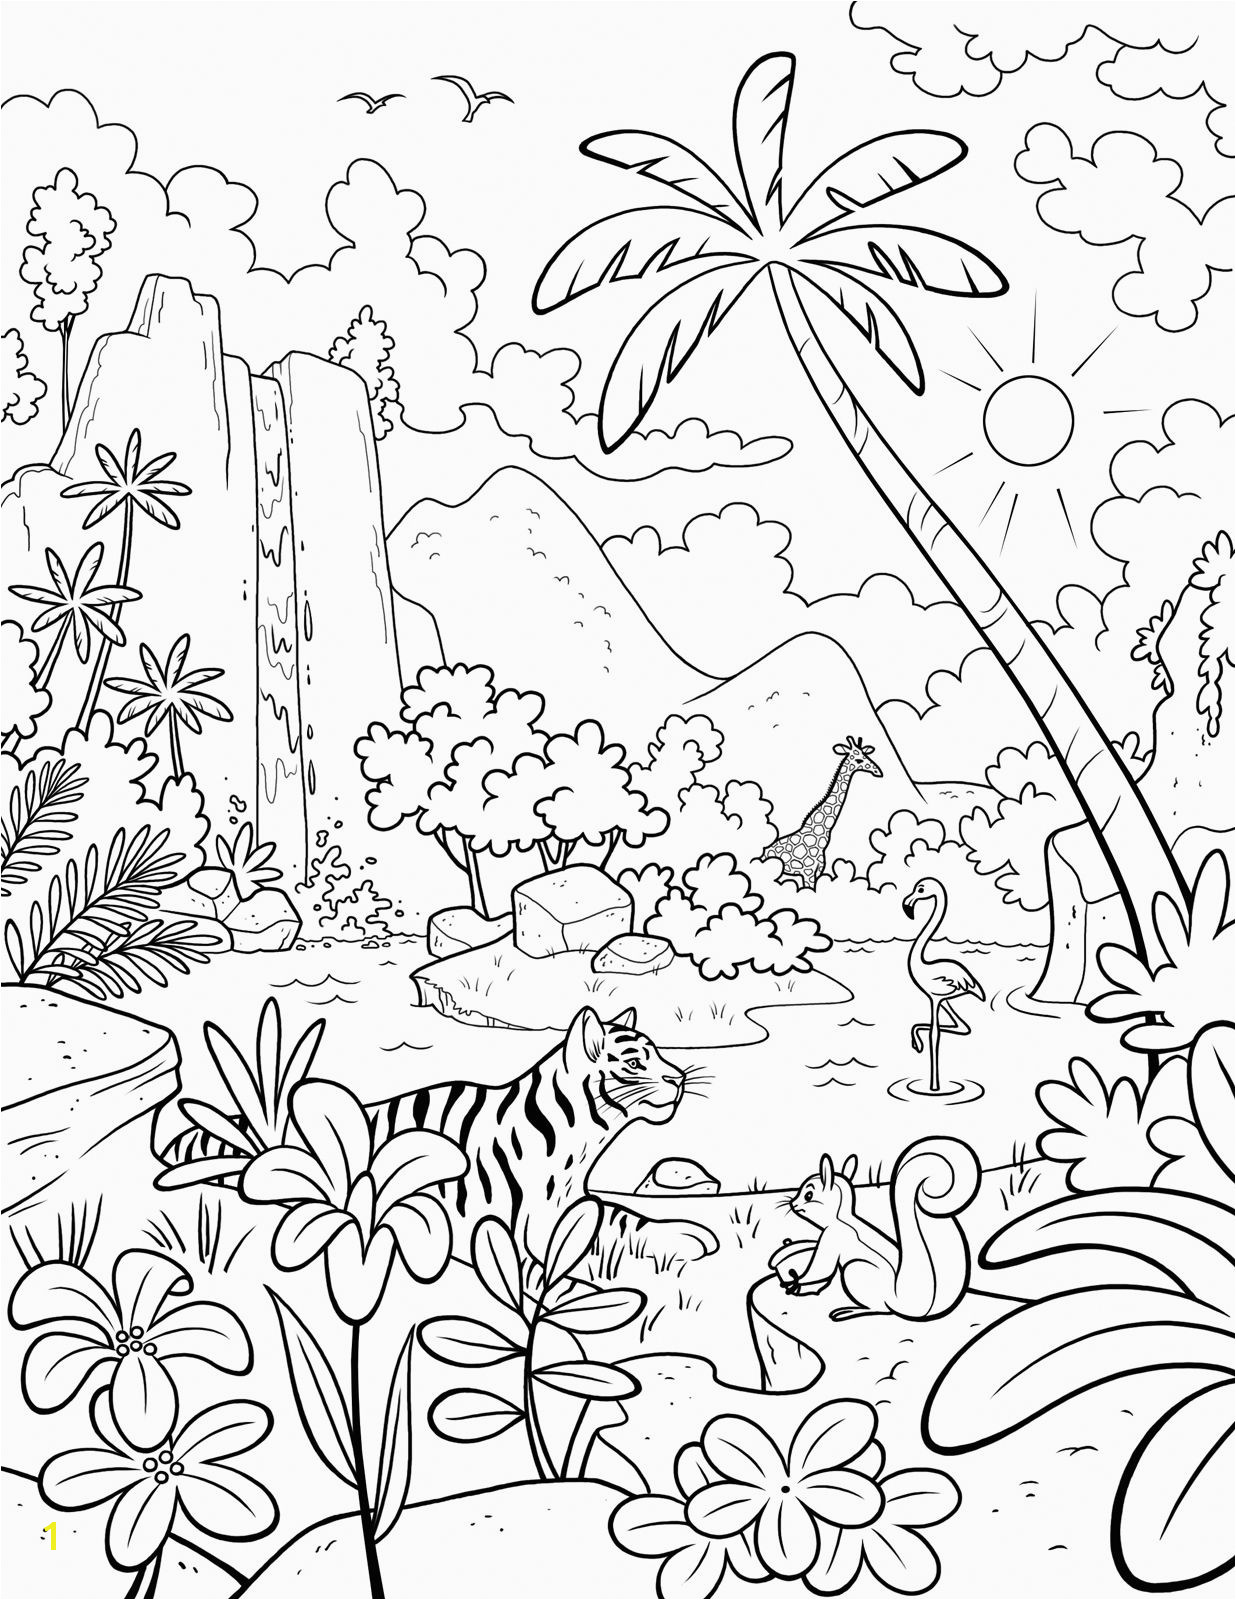 A LDS Primary coloring page from lds ldsprimary